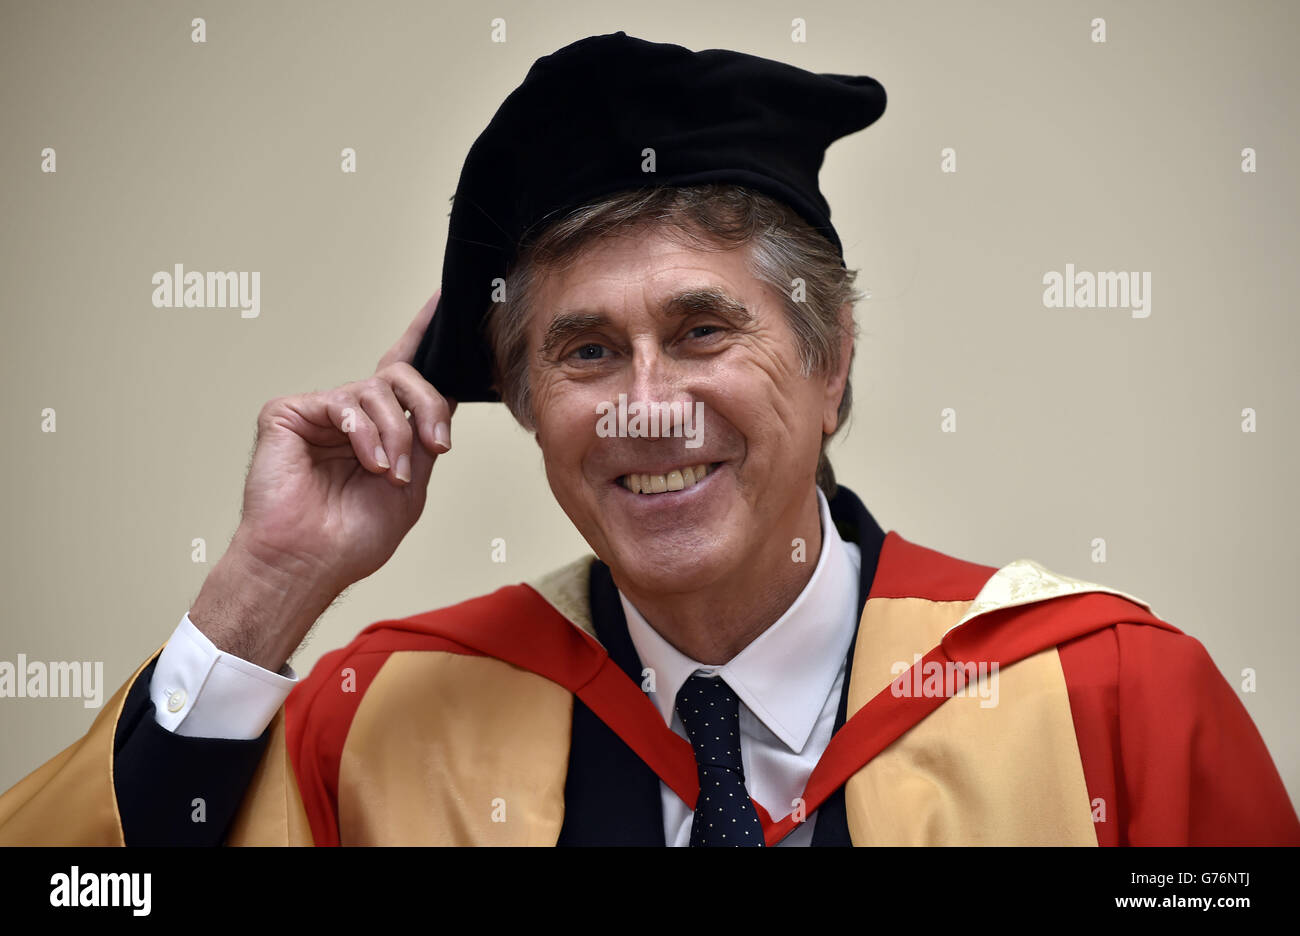 Legendary singer Bryan Ferry receives an honorary degree from Newcastle University as he is made an honorary Doctor of Music from the university where he graduated in Fine Art in 1968. Stock Photo